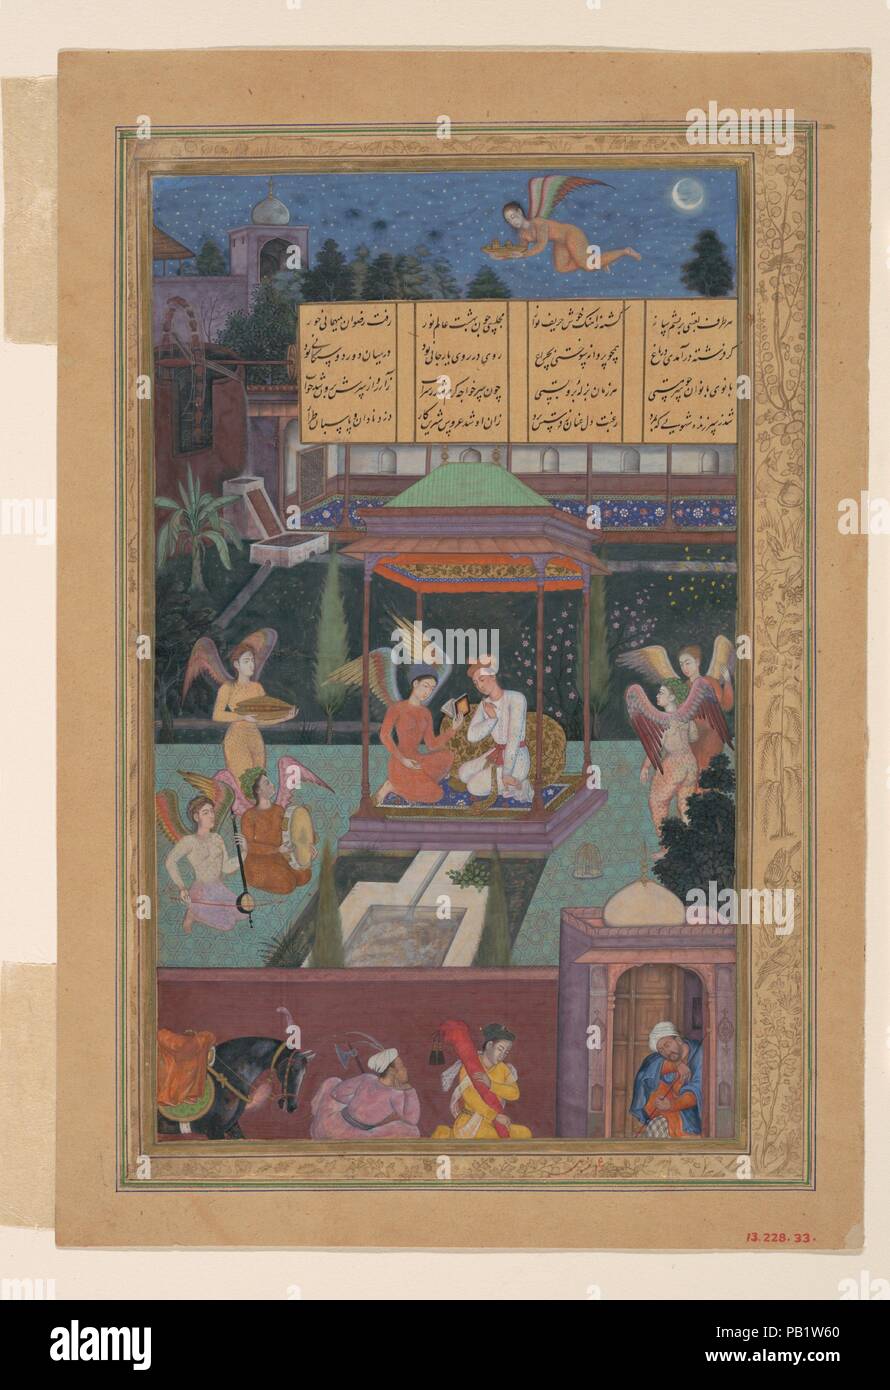 'The Story of the Princess of the Blue Pavillion: The Youth of Rum Is Entertained in a Garden by a Fairy and her Maidens', Folio from a Khamsa (Quintet) of Amir Khusrau Dihlavi. Artist: Painting by Manohar (active ca. 1582-1624). Calligrapher: Muhammad Husain Kashmiri (active ca. 1560-1611). Dimensions: H. 9 3/4 in. (24.8 cm)  W. 6 1/4 in. (15.9 cm). Poet: Amir Khusrau Dihlavi (1253-1325). Date: 1597-98.  Approximately one century after the Persian poet Nizami wrote his Khamsa (Quintet), the Indian poet Amir Khusrau Dihlavi composed a response using Nizami's structure but varying his stories s Stock Photo